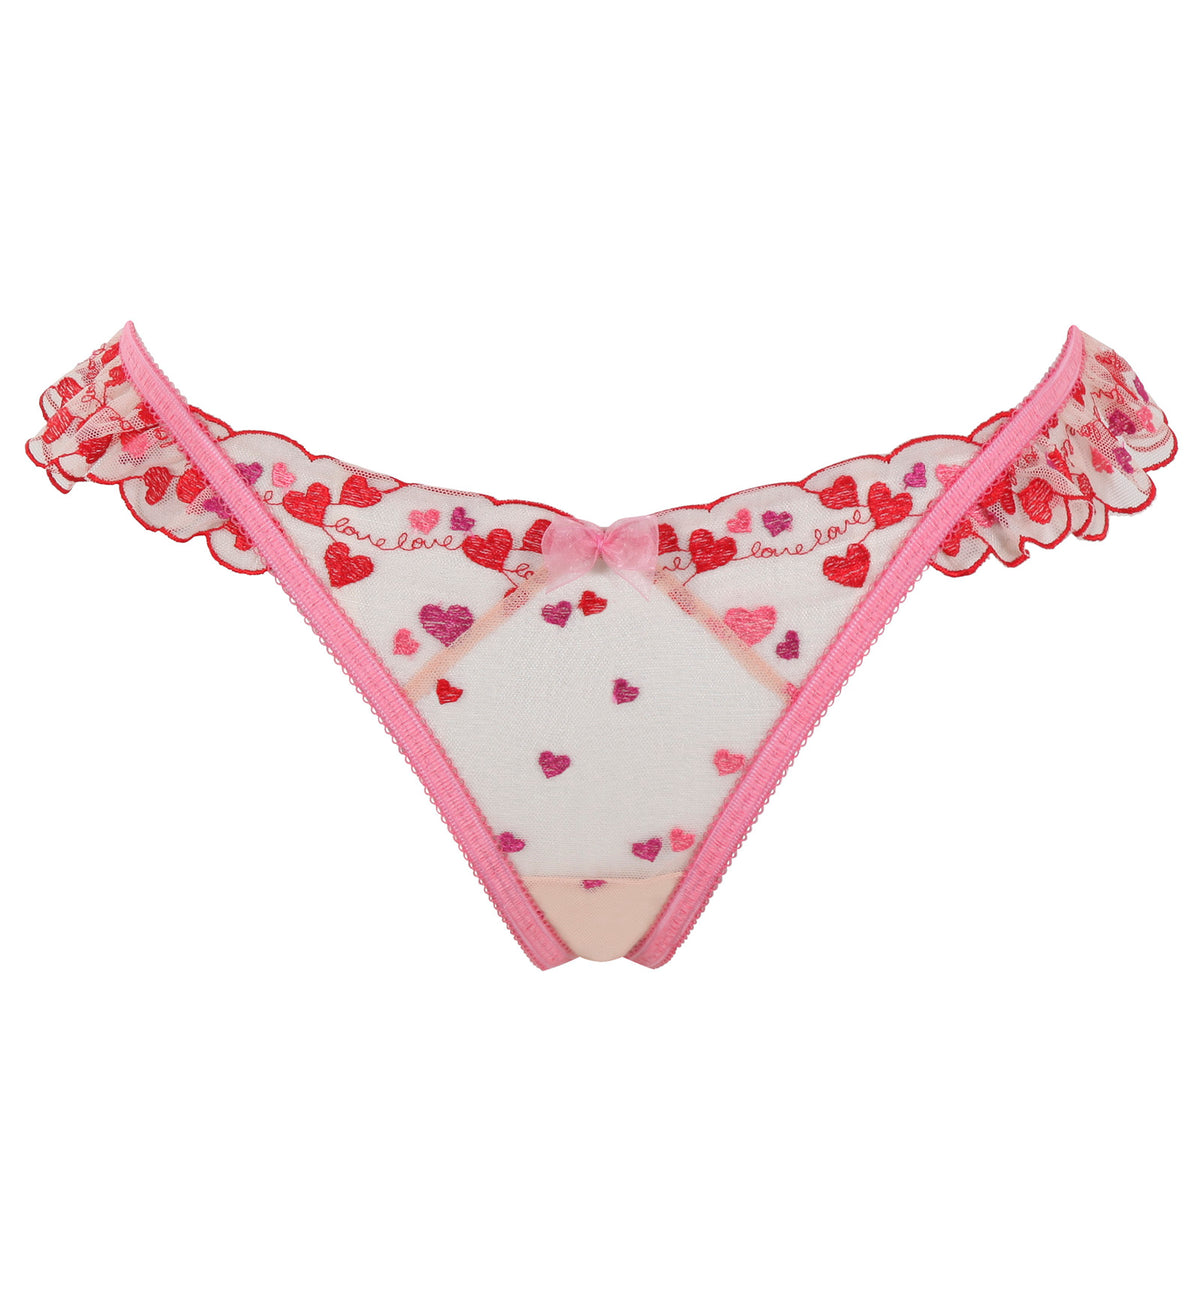 Cleo by Panache Belle Frill Thong (10879),8-XS,Hearts - Hearts,XS